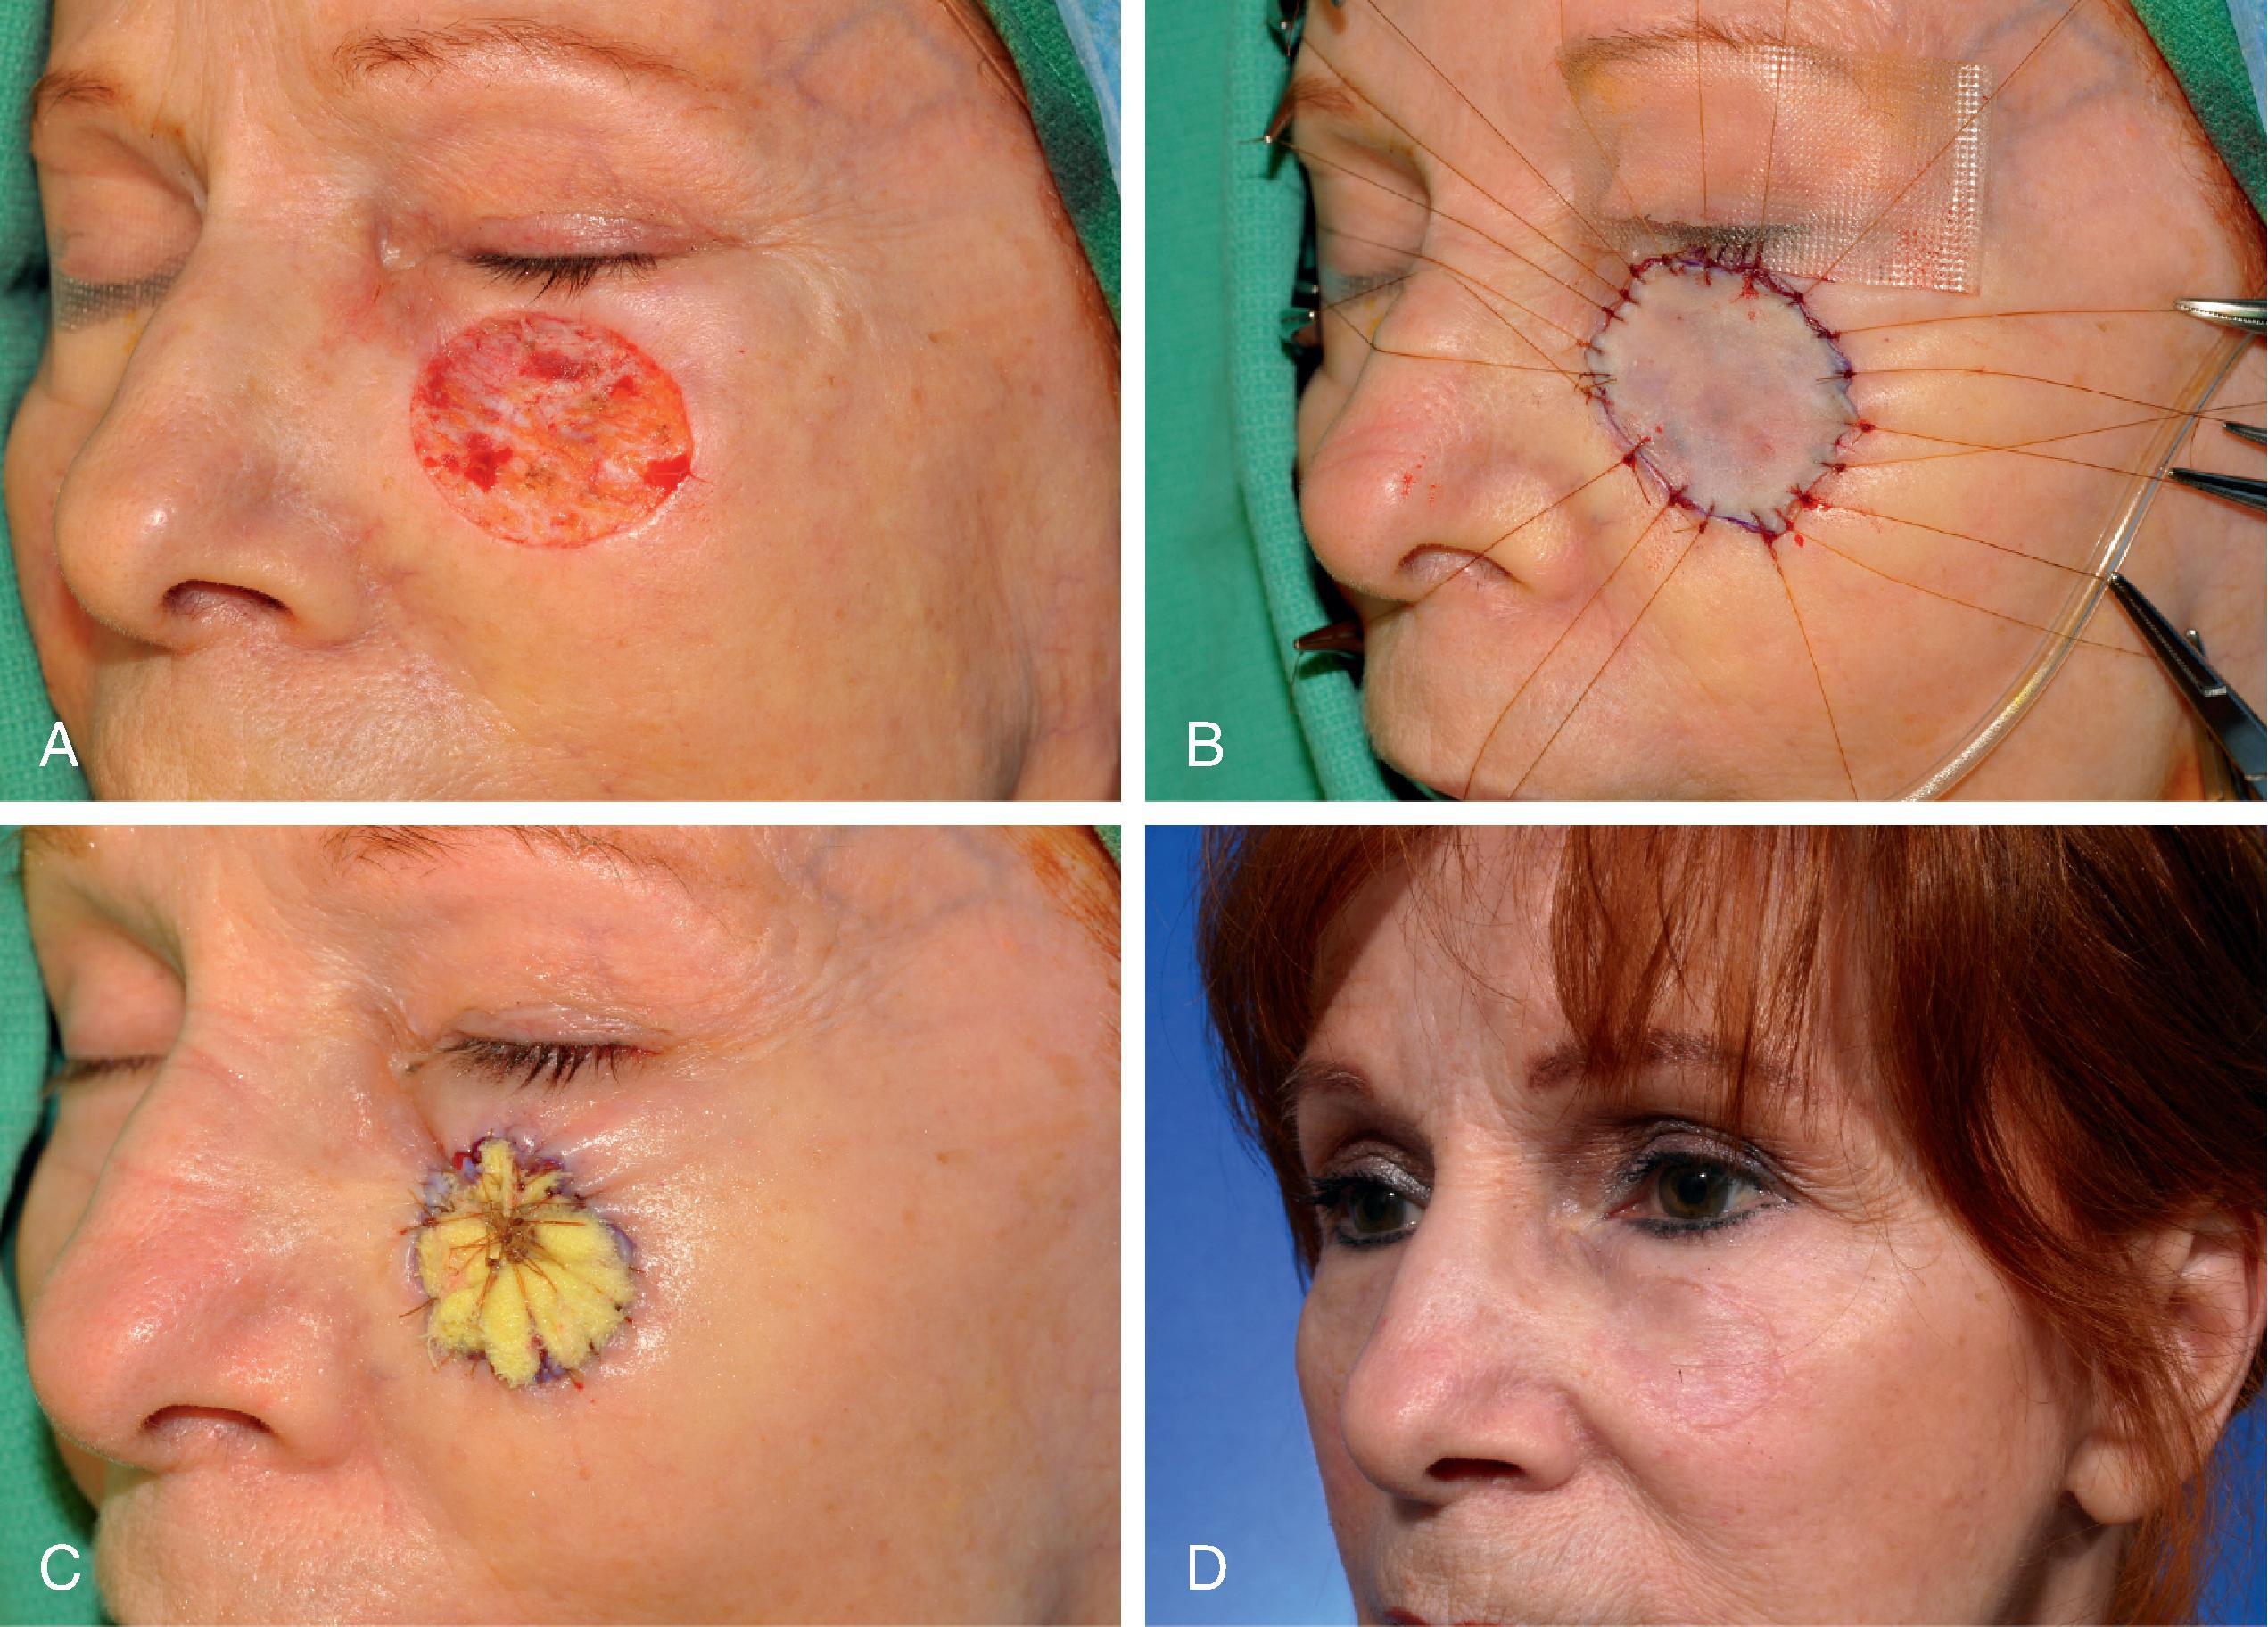 FIG. 15.4, A , A 3 × 2.7 cm skin defect of cheek after micrographic excision of squamous cell carcinoma. B , Defect repaired with full-thickness skin graft from supraclavicular fossa. C , Gauze bolster dressing secures graft in place for 5 days. D , One year postoperative. (Courtesy Shan R. Baker, MD.)